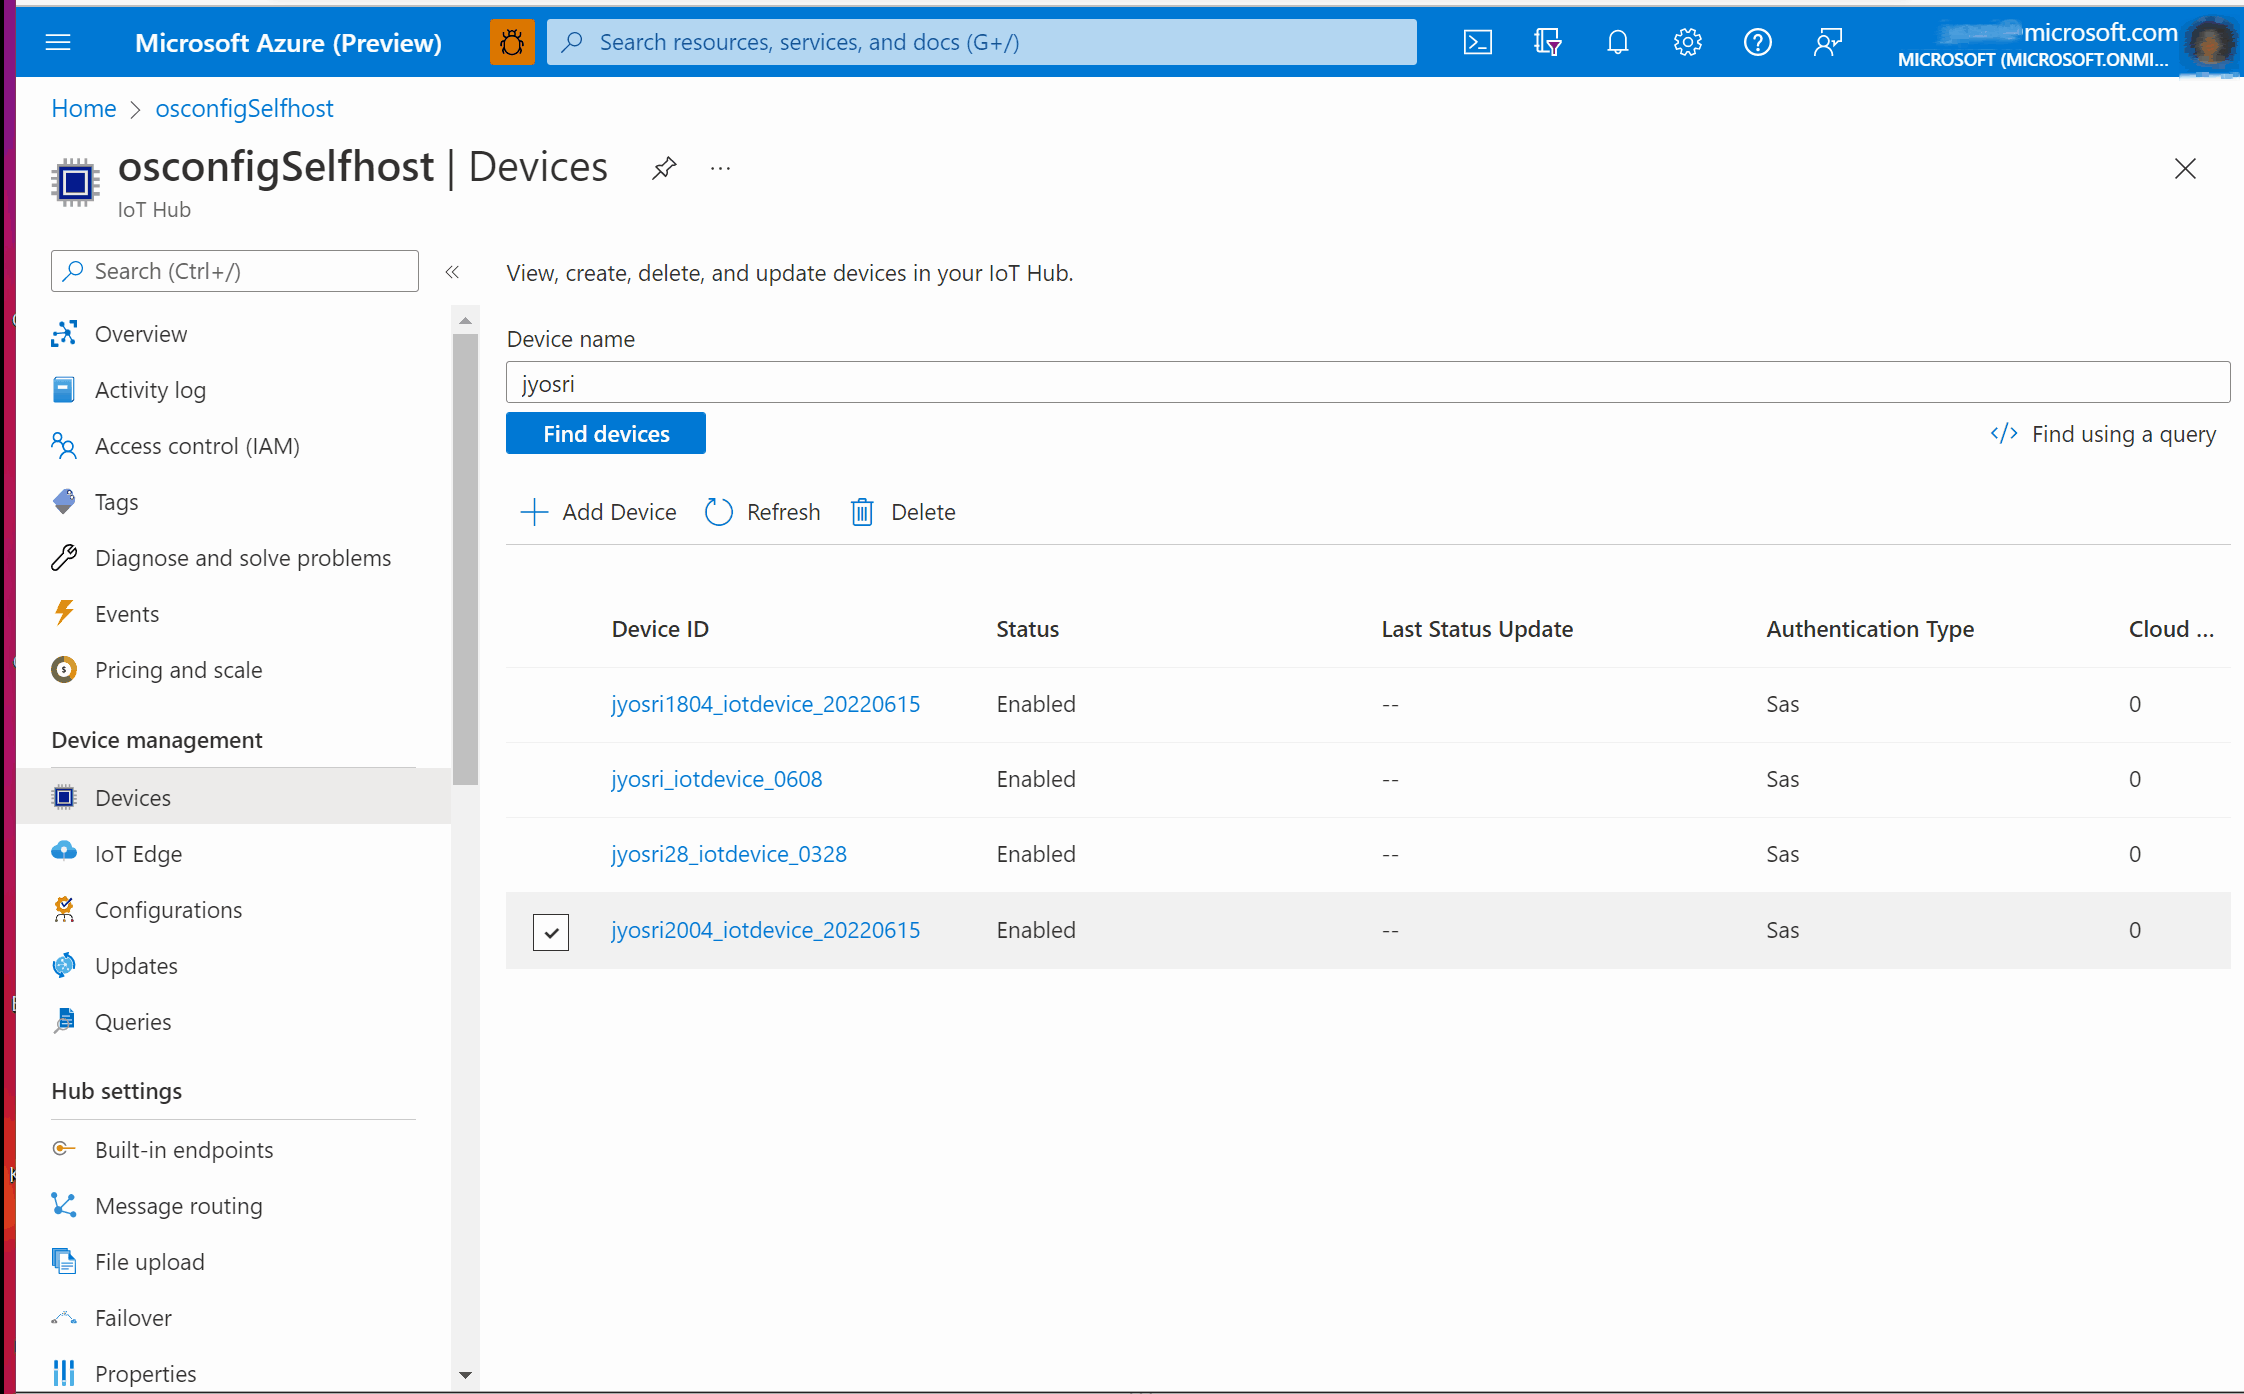 Screen capture showing reported twin contents for a ping command using OSConfig module for a single device from Azure Portal